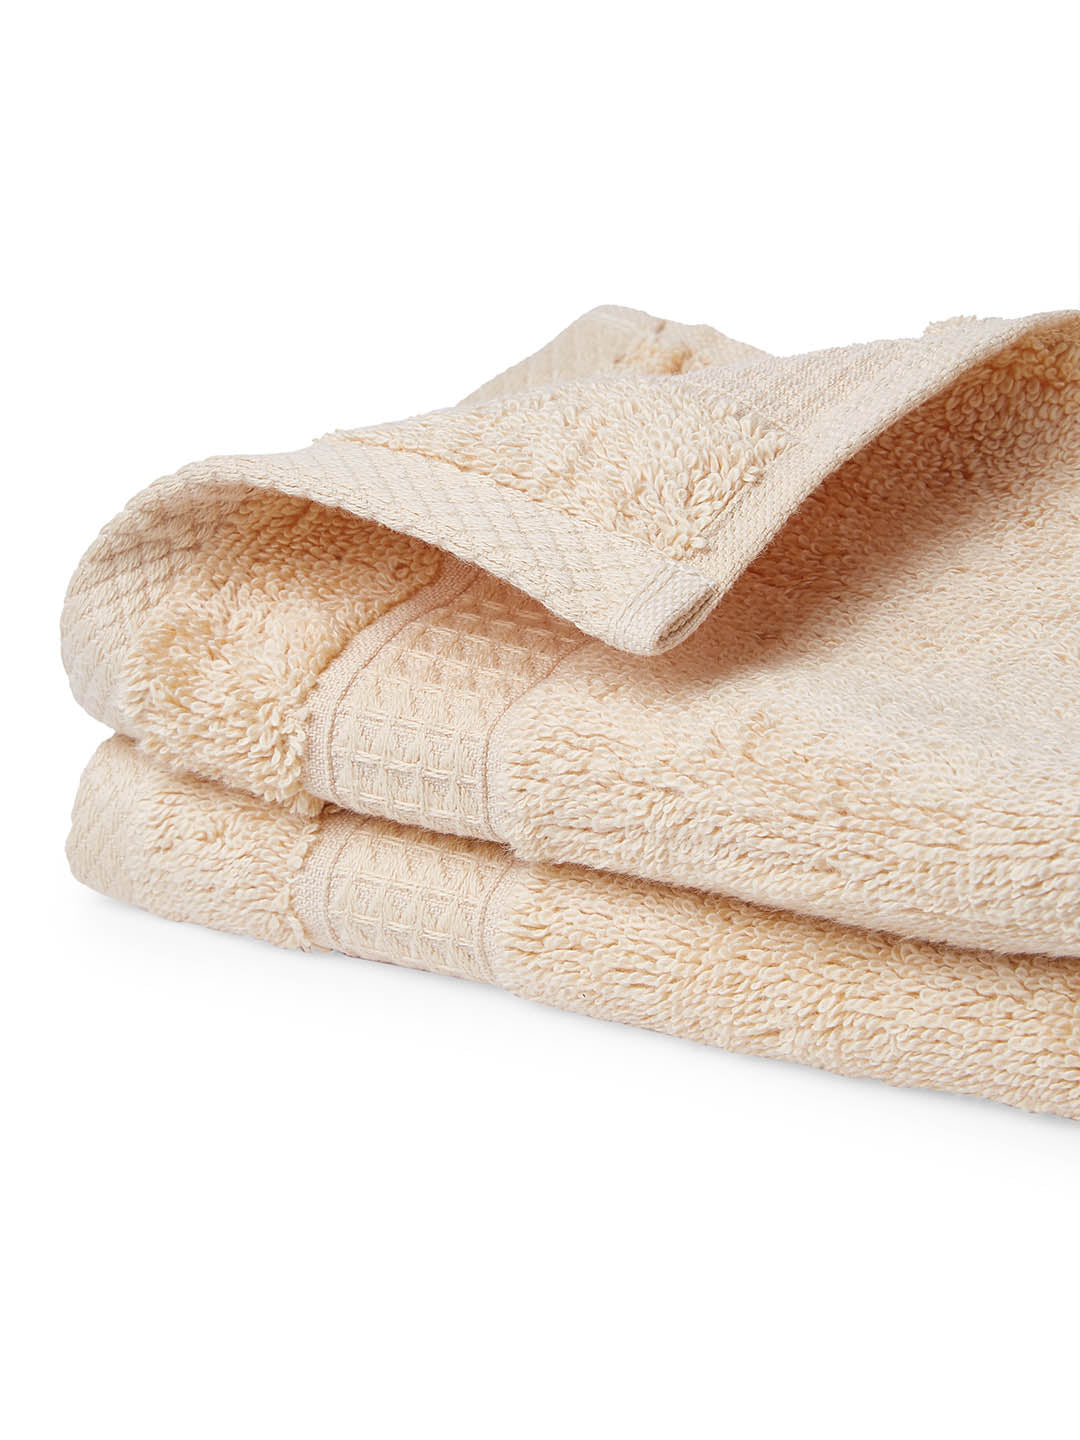 Spaces Organic 2 Pieces Hand Towels (Brown)